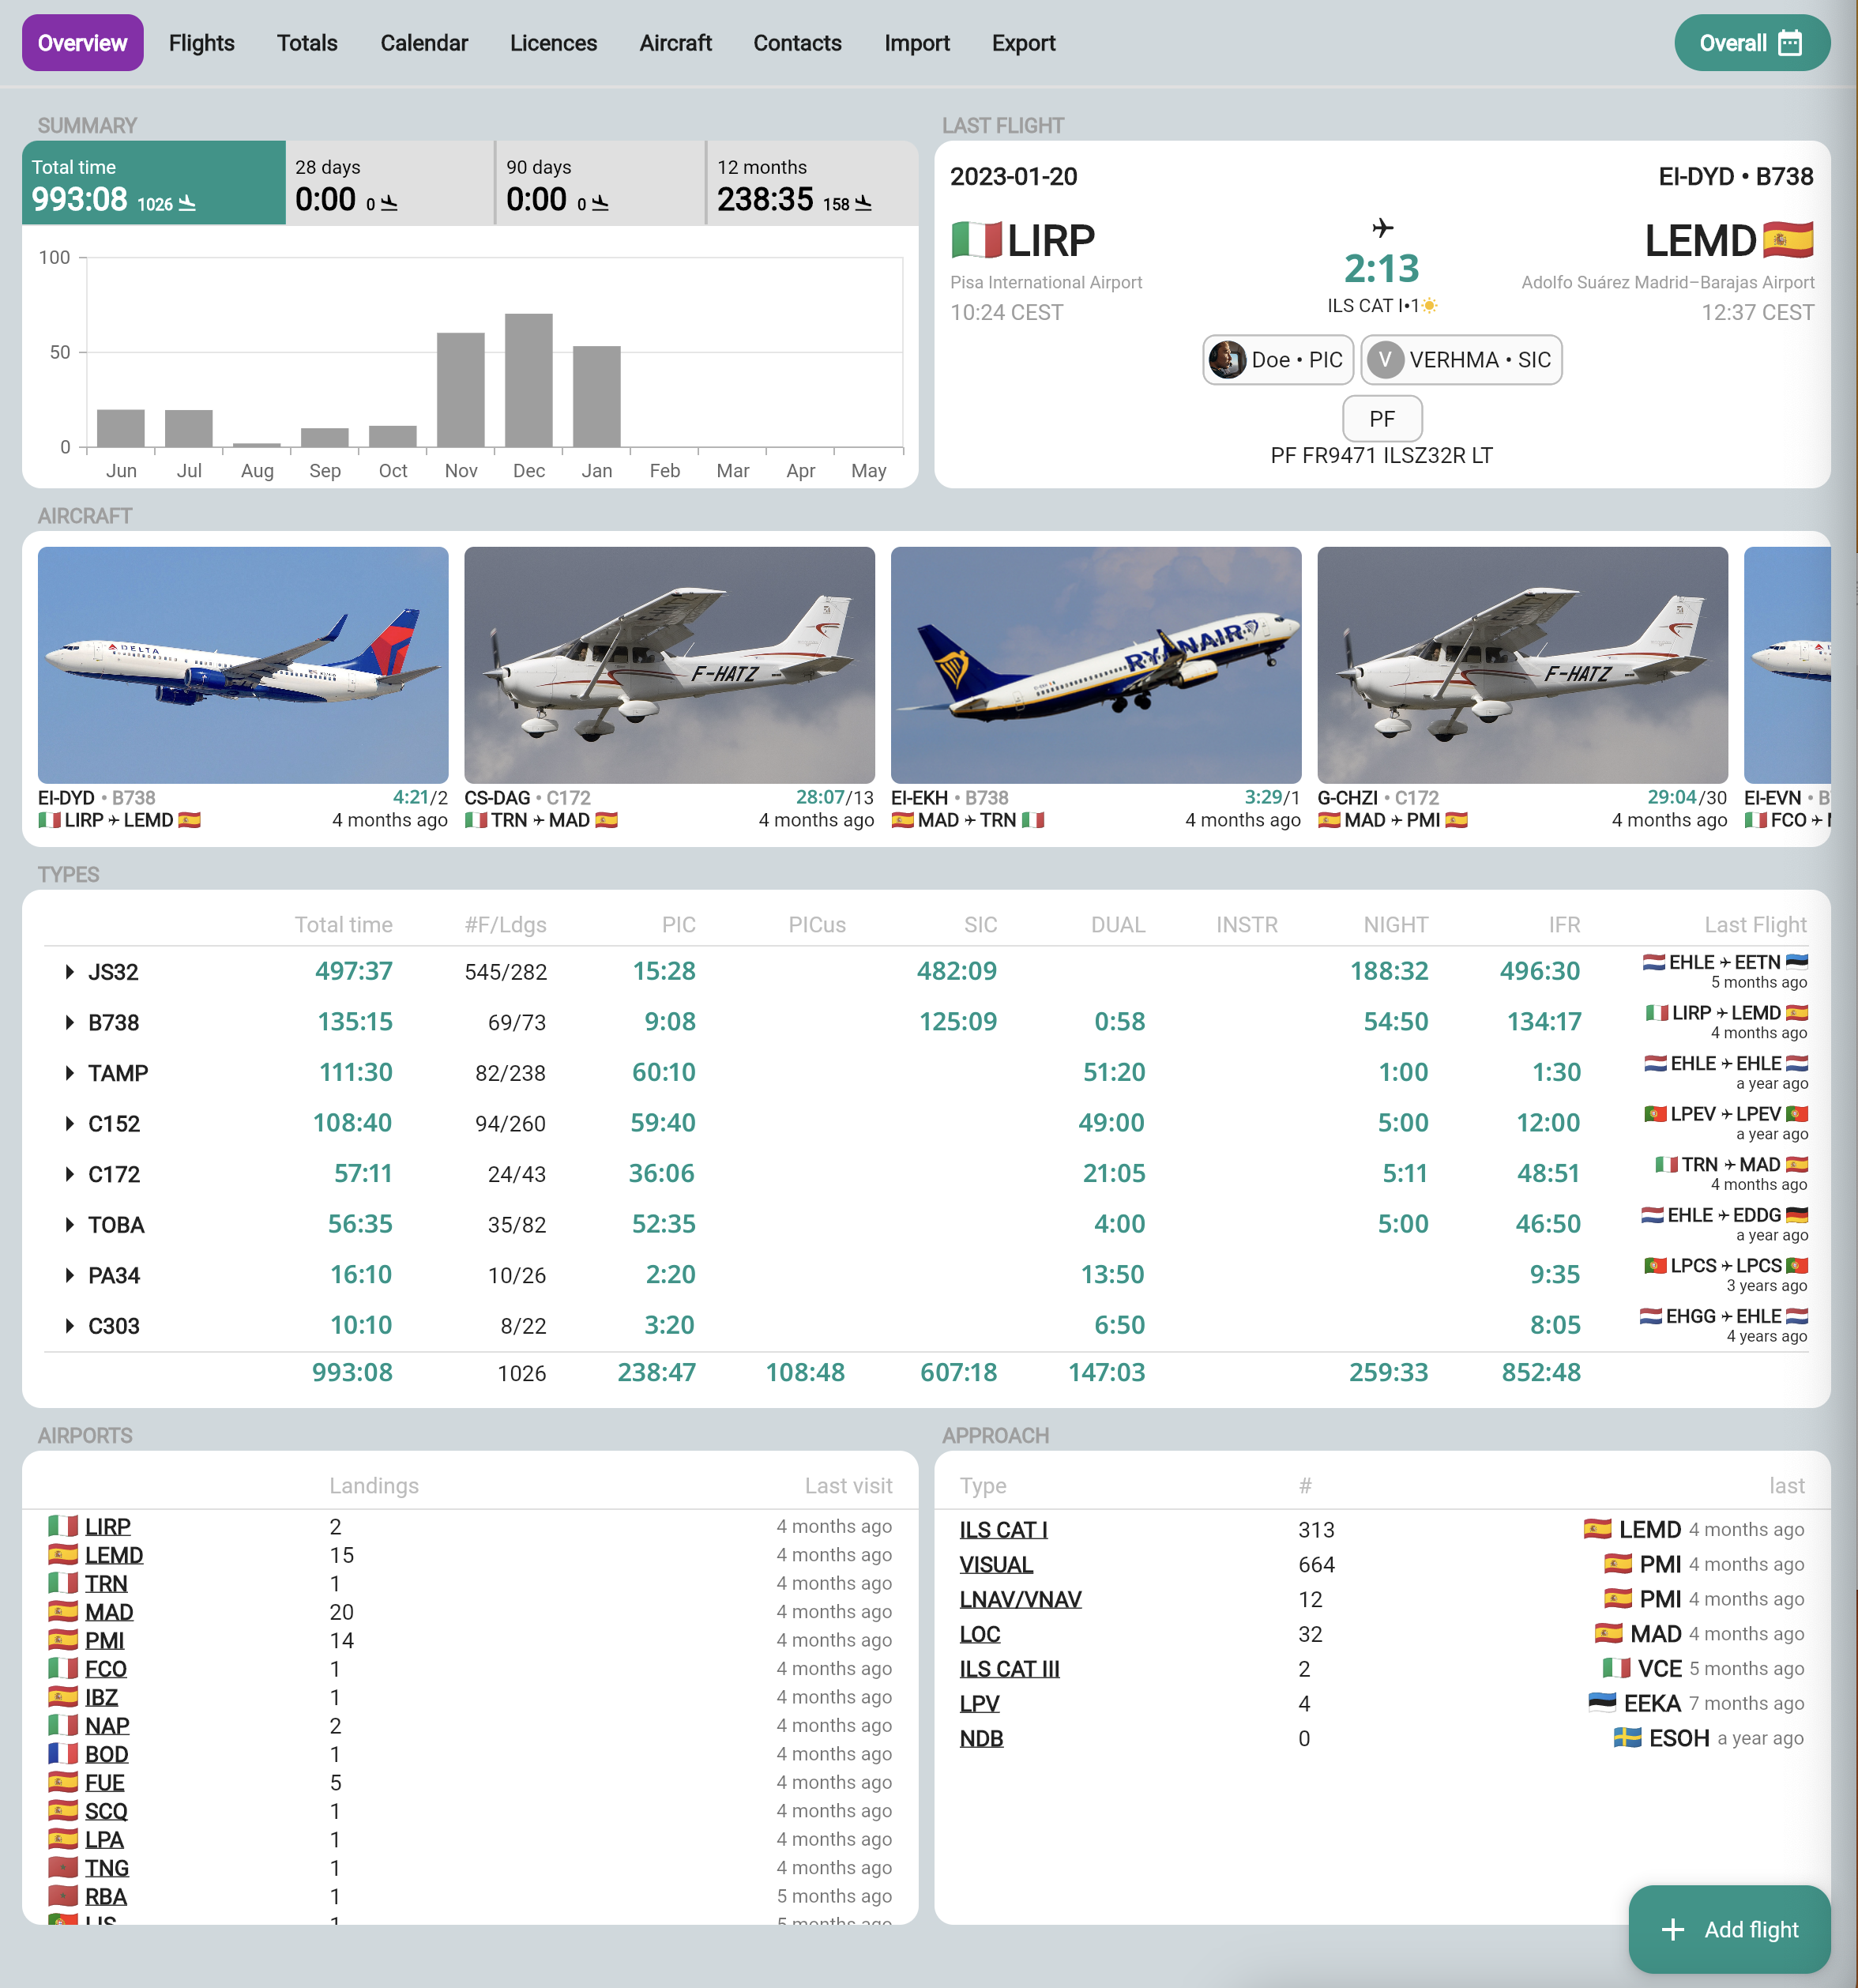 Overview section in web app